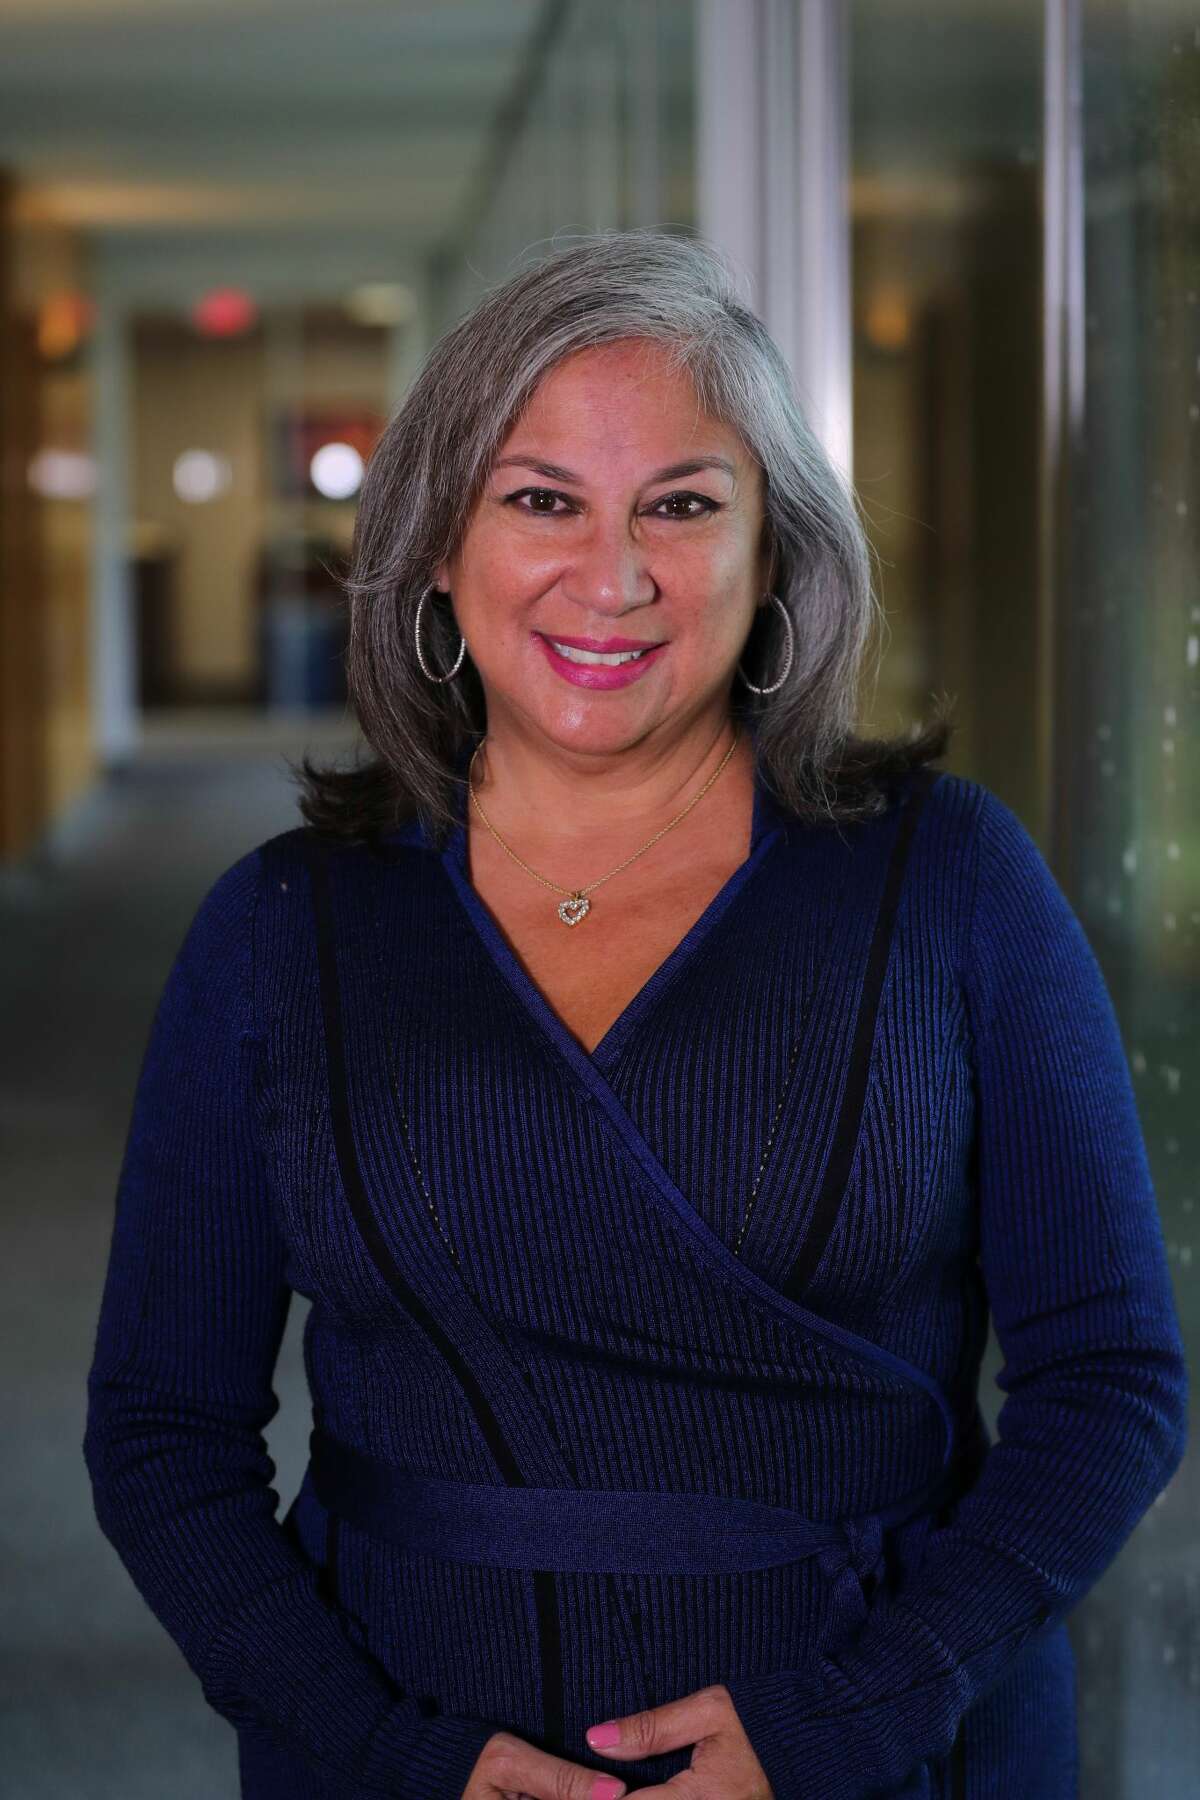 ABC13 KTRK is about to lose a special member of their team this week. Cynthia Cisneros, who has made a profound impact in the Houston community for 30 years, is retiring.